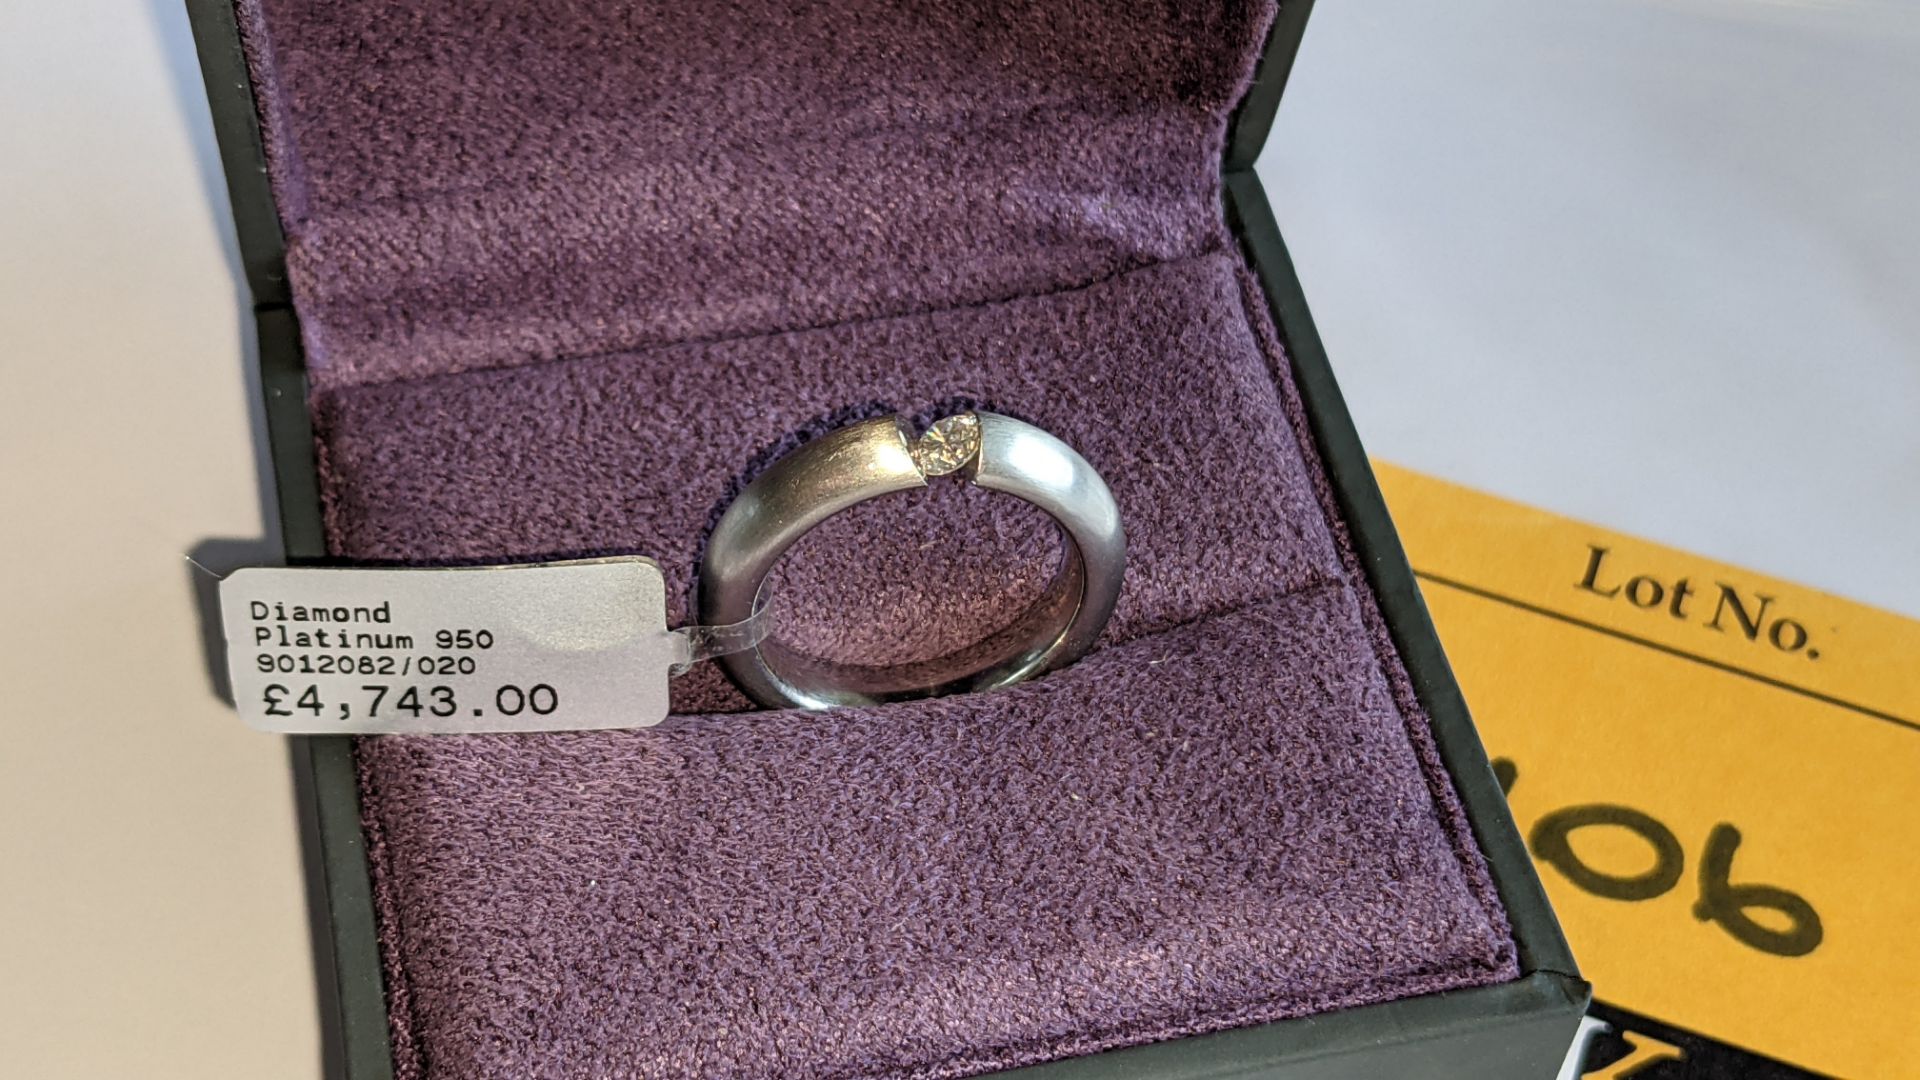 Platinum 950 & diamond ring with 0.20ct tension mounted stone RRP £4,743 - Image 4 of 18